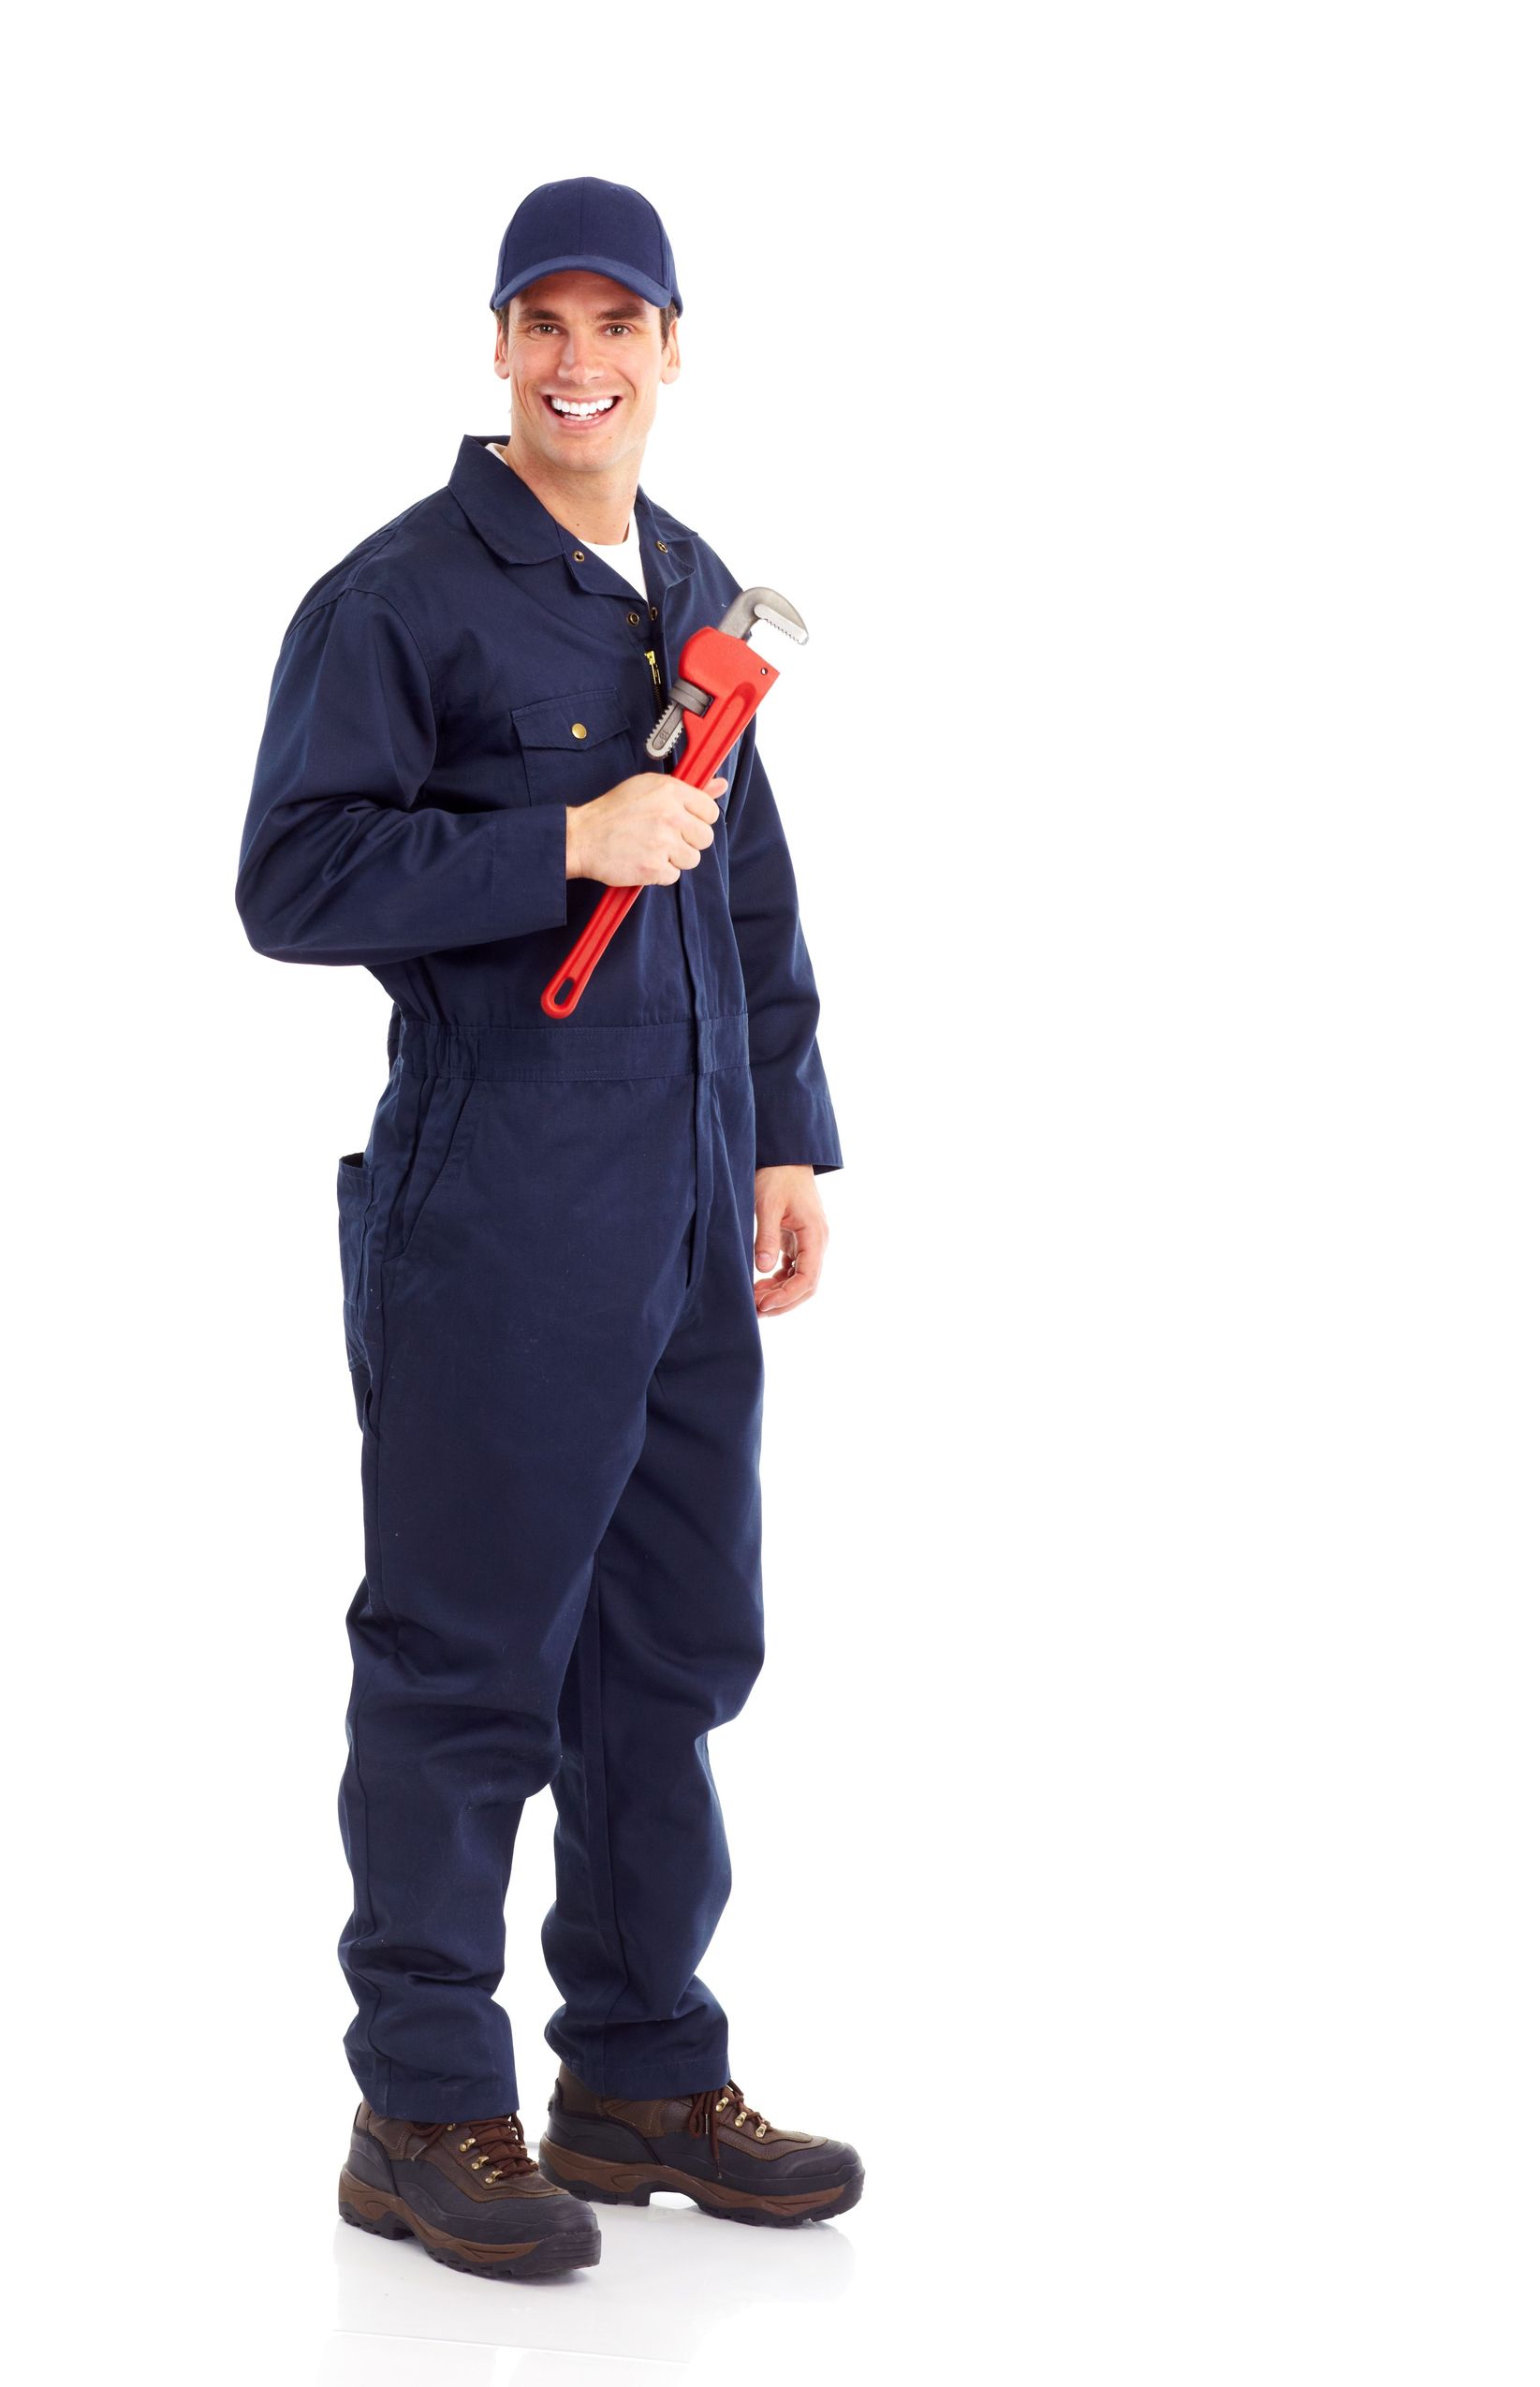 Important Questions to Ask Before Hiring a Company for Plumbing Repairs